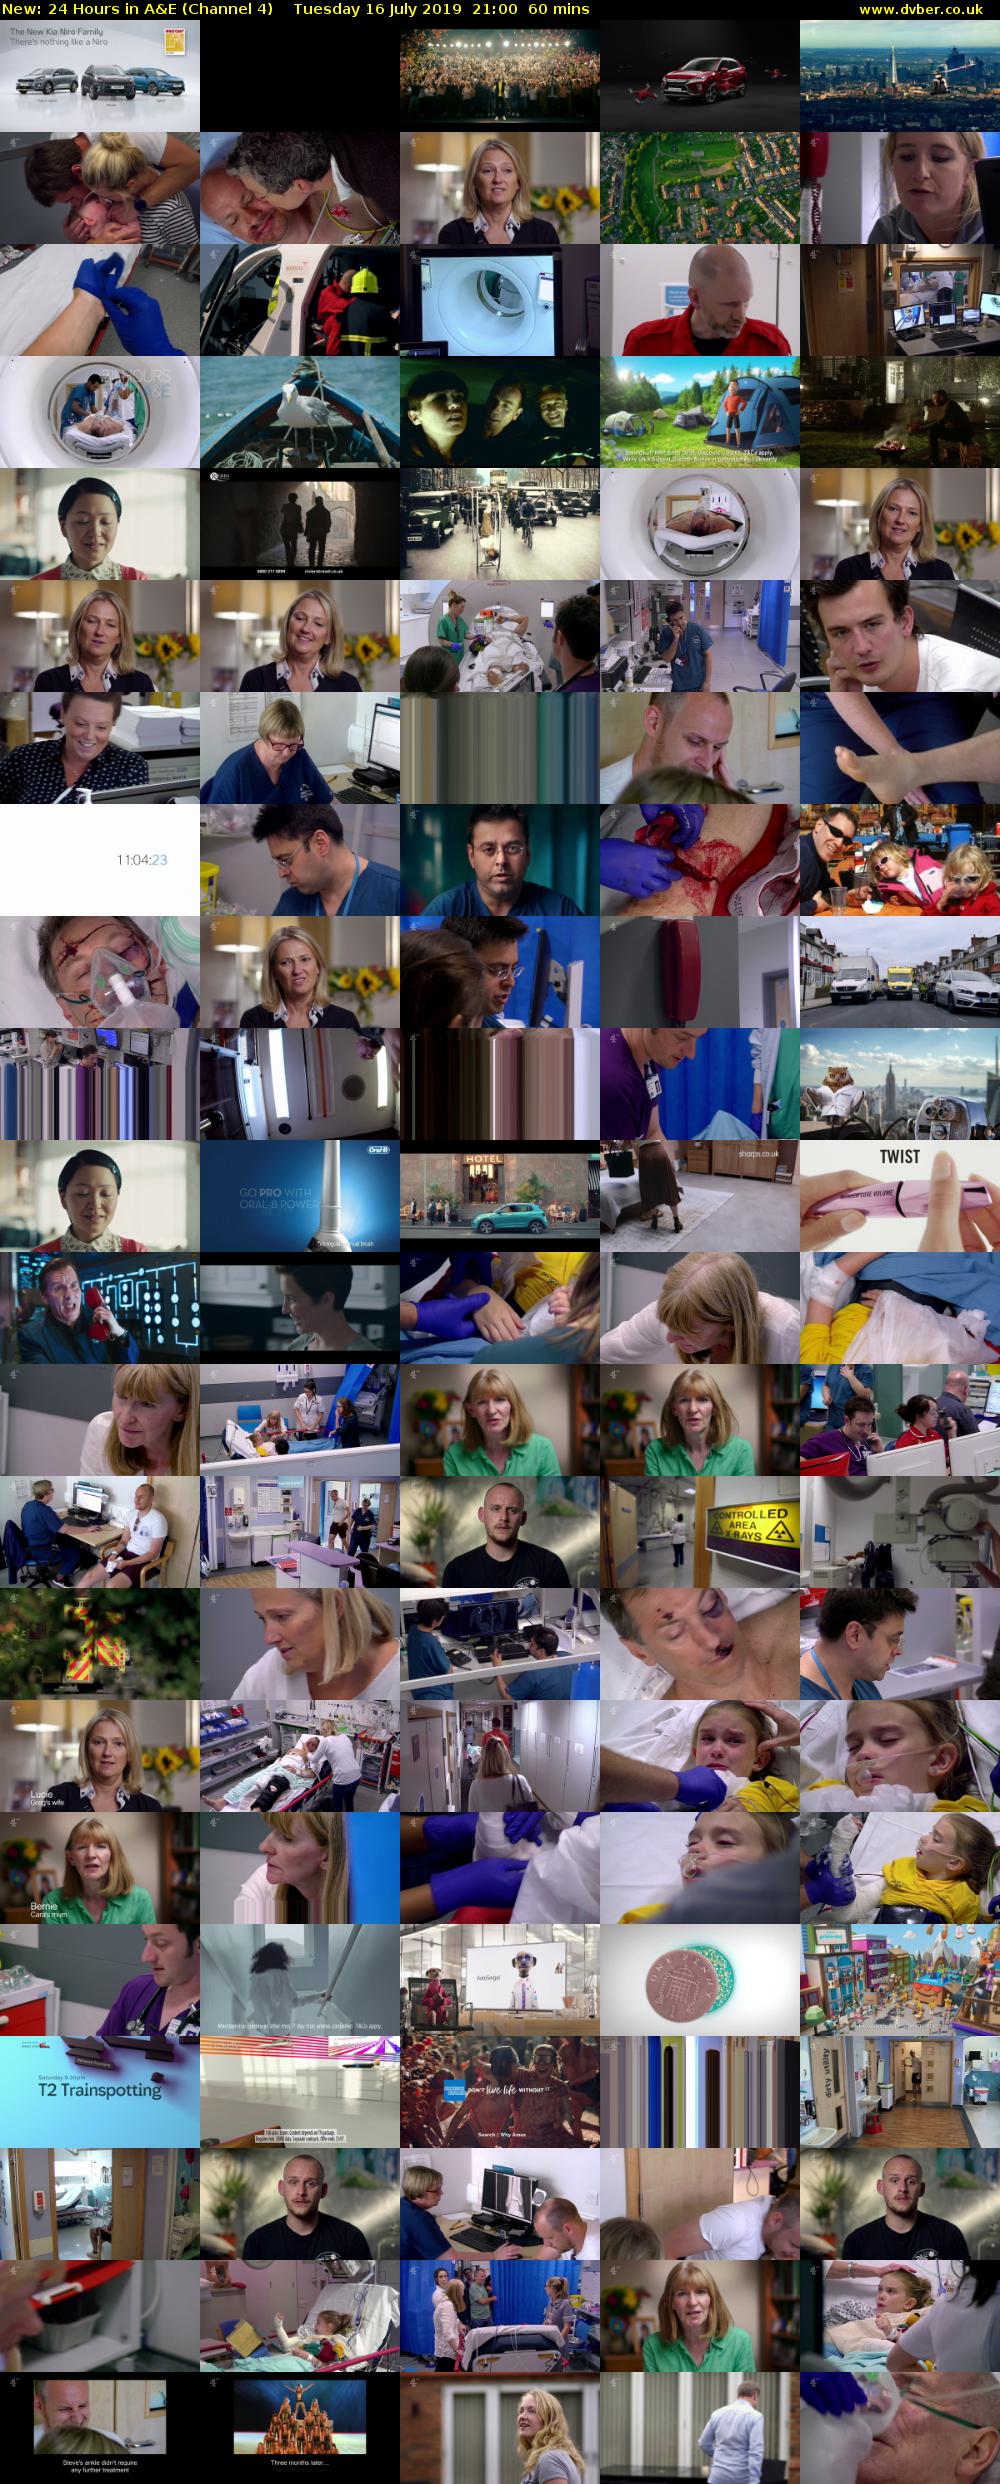 24 Hours in A&E (Channel 4) Tuesday 16 July 2019 21:00 - 22:00